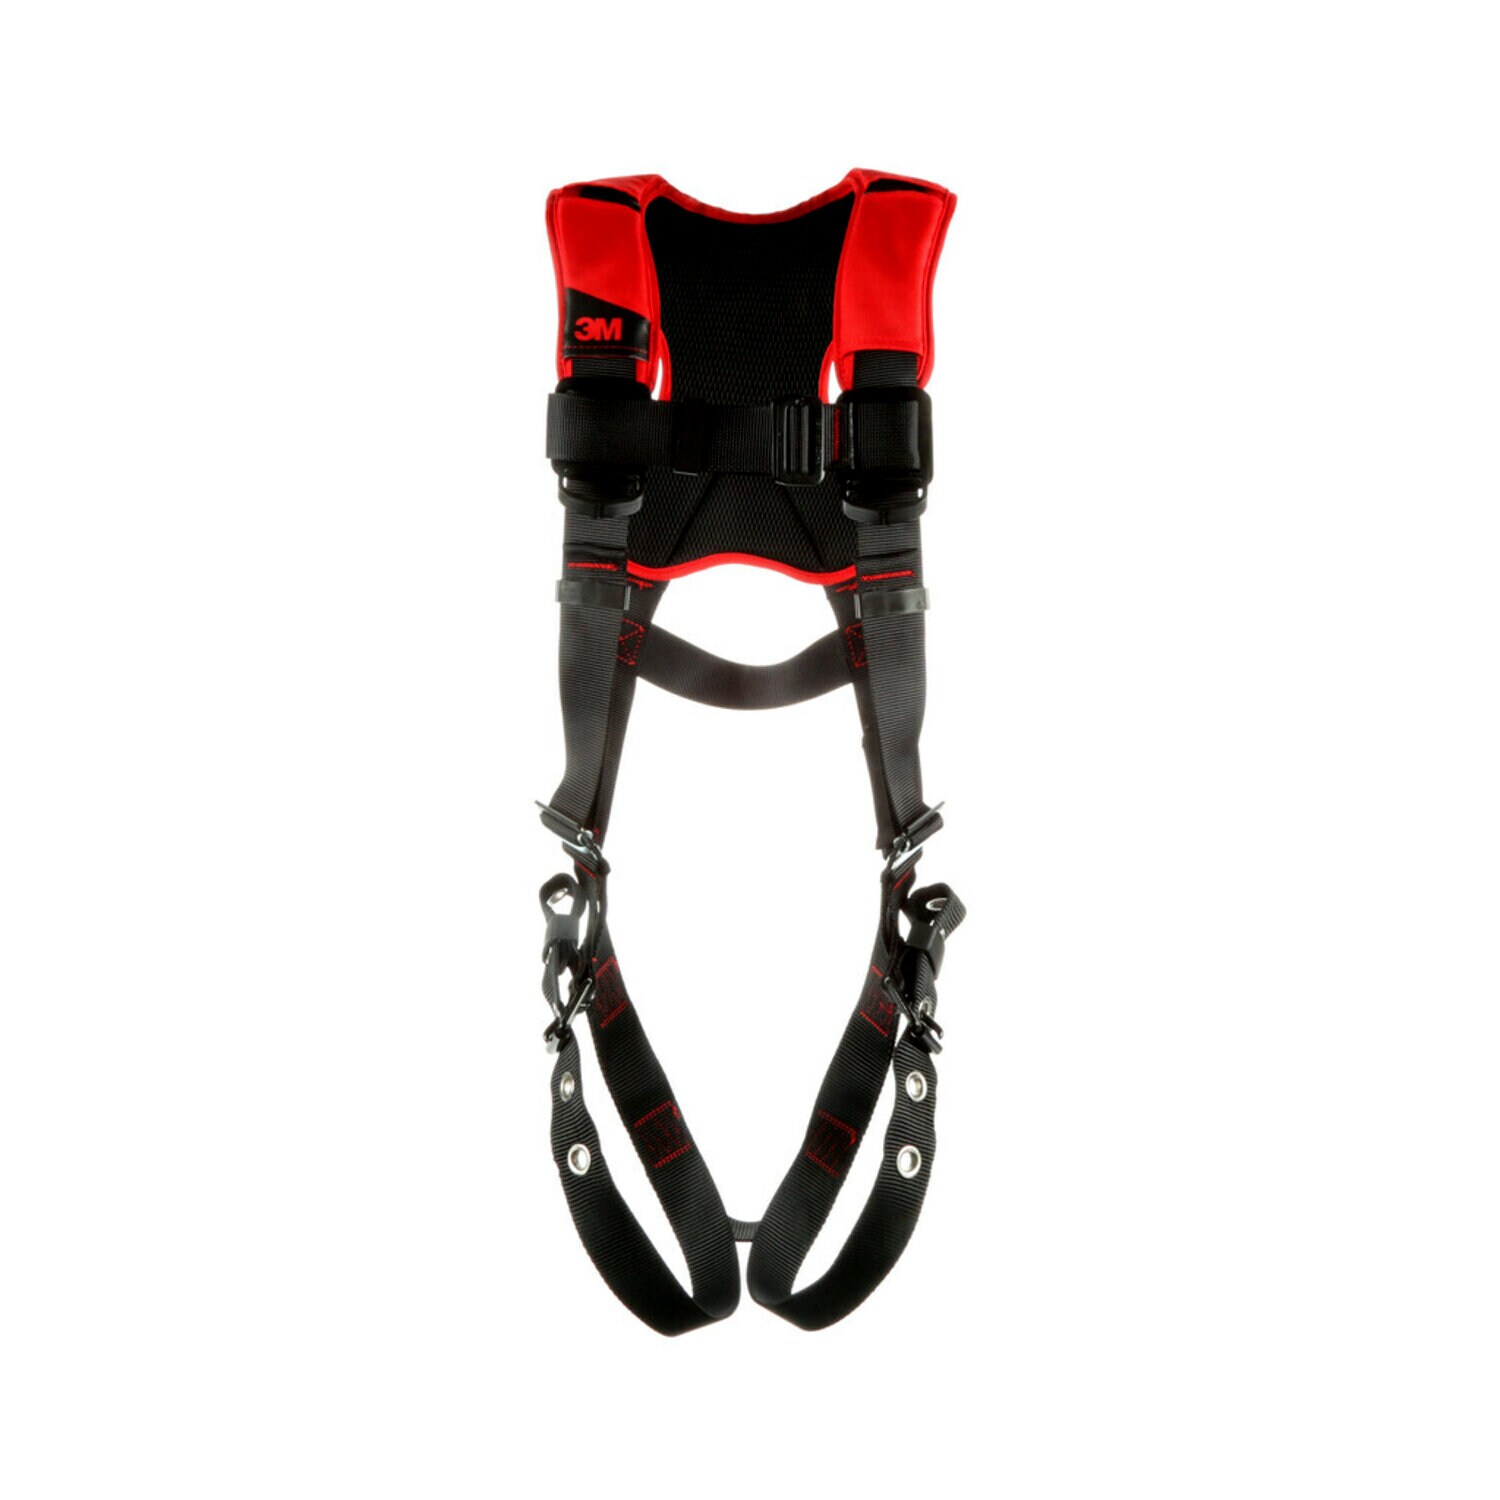 7012816693 - 3M Protecta P200 Comfort Vest Safety Harness 1161419, X-Large